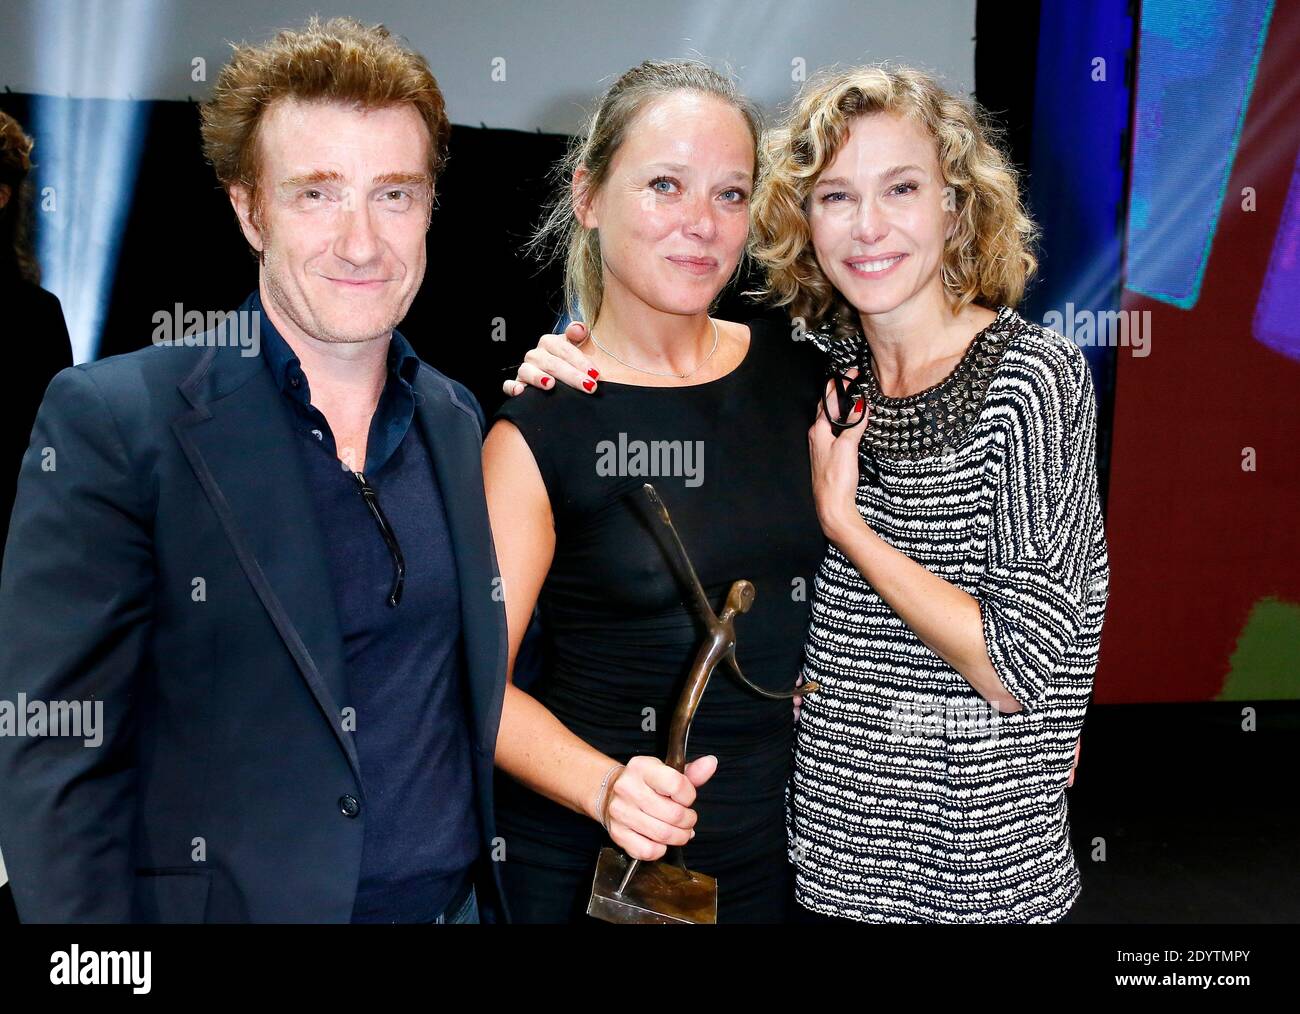 Best Actress or C’Est Pas De L’Amour Marie Guillard fla,ked by Thierry Fremont and Pascale Arbillot attending the 15th Festival of TV Fiction closing ceremony in La Rochelle, western France on September 15, 2013. Photo by Patrick Bernard/ABACAPRESS.COM Stock Photo